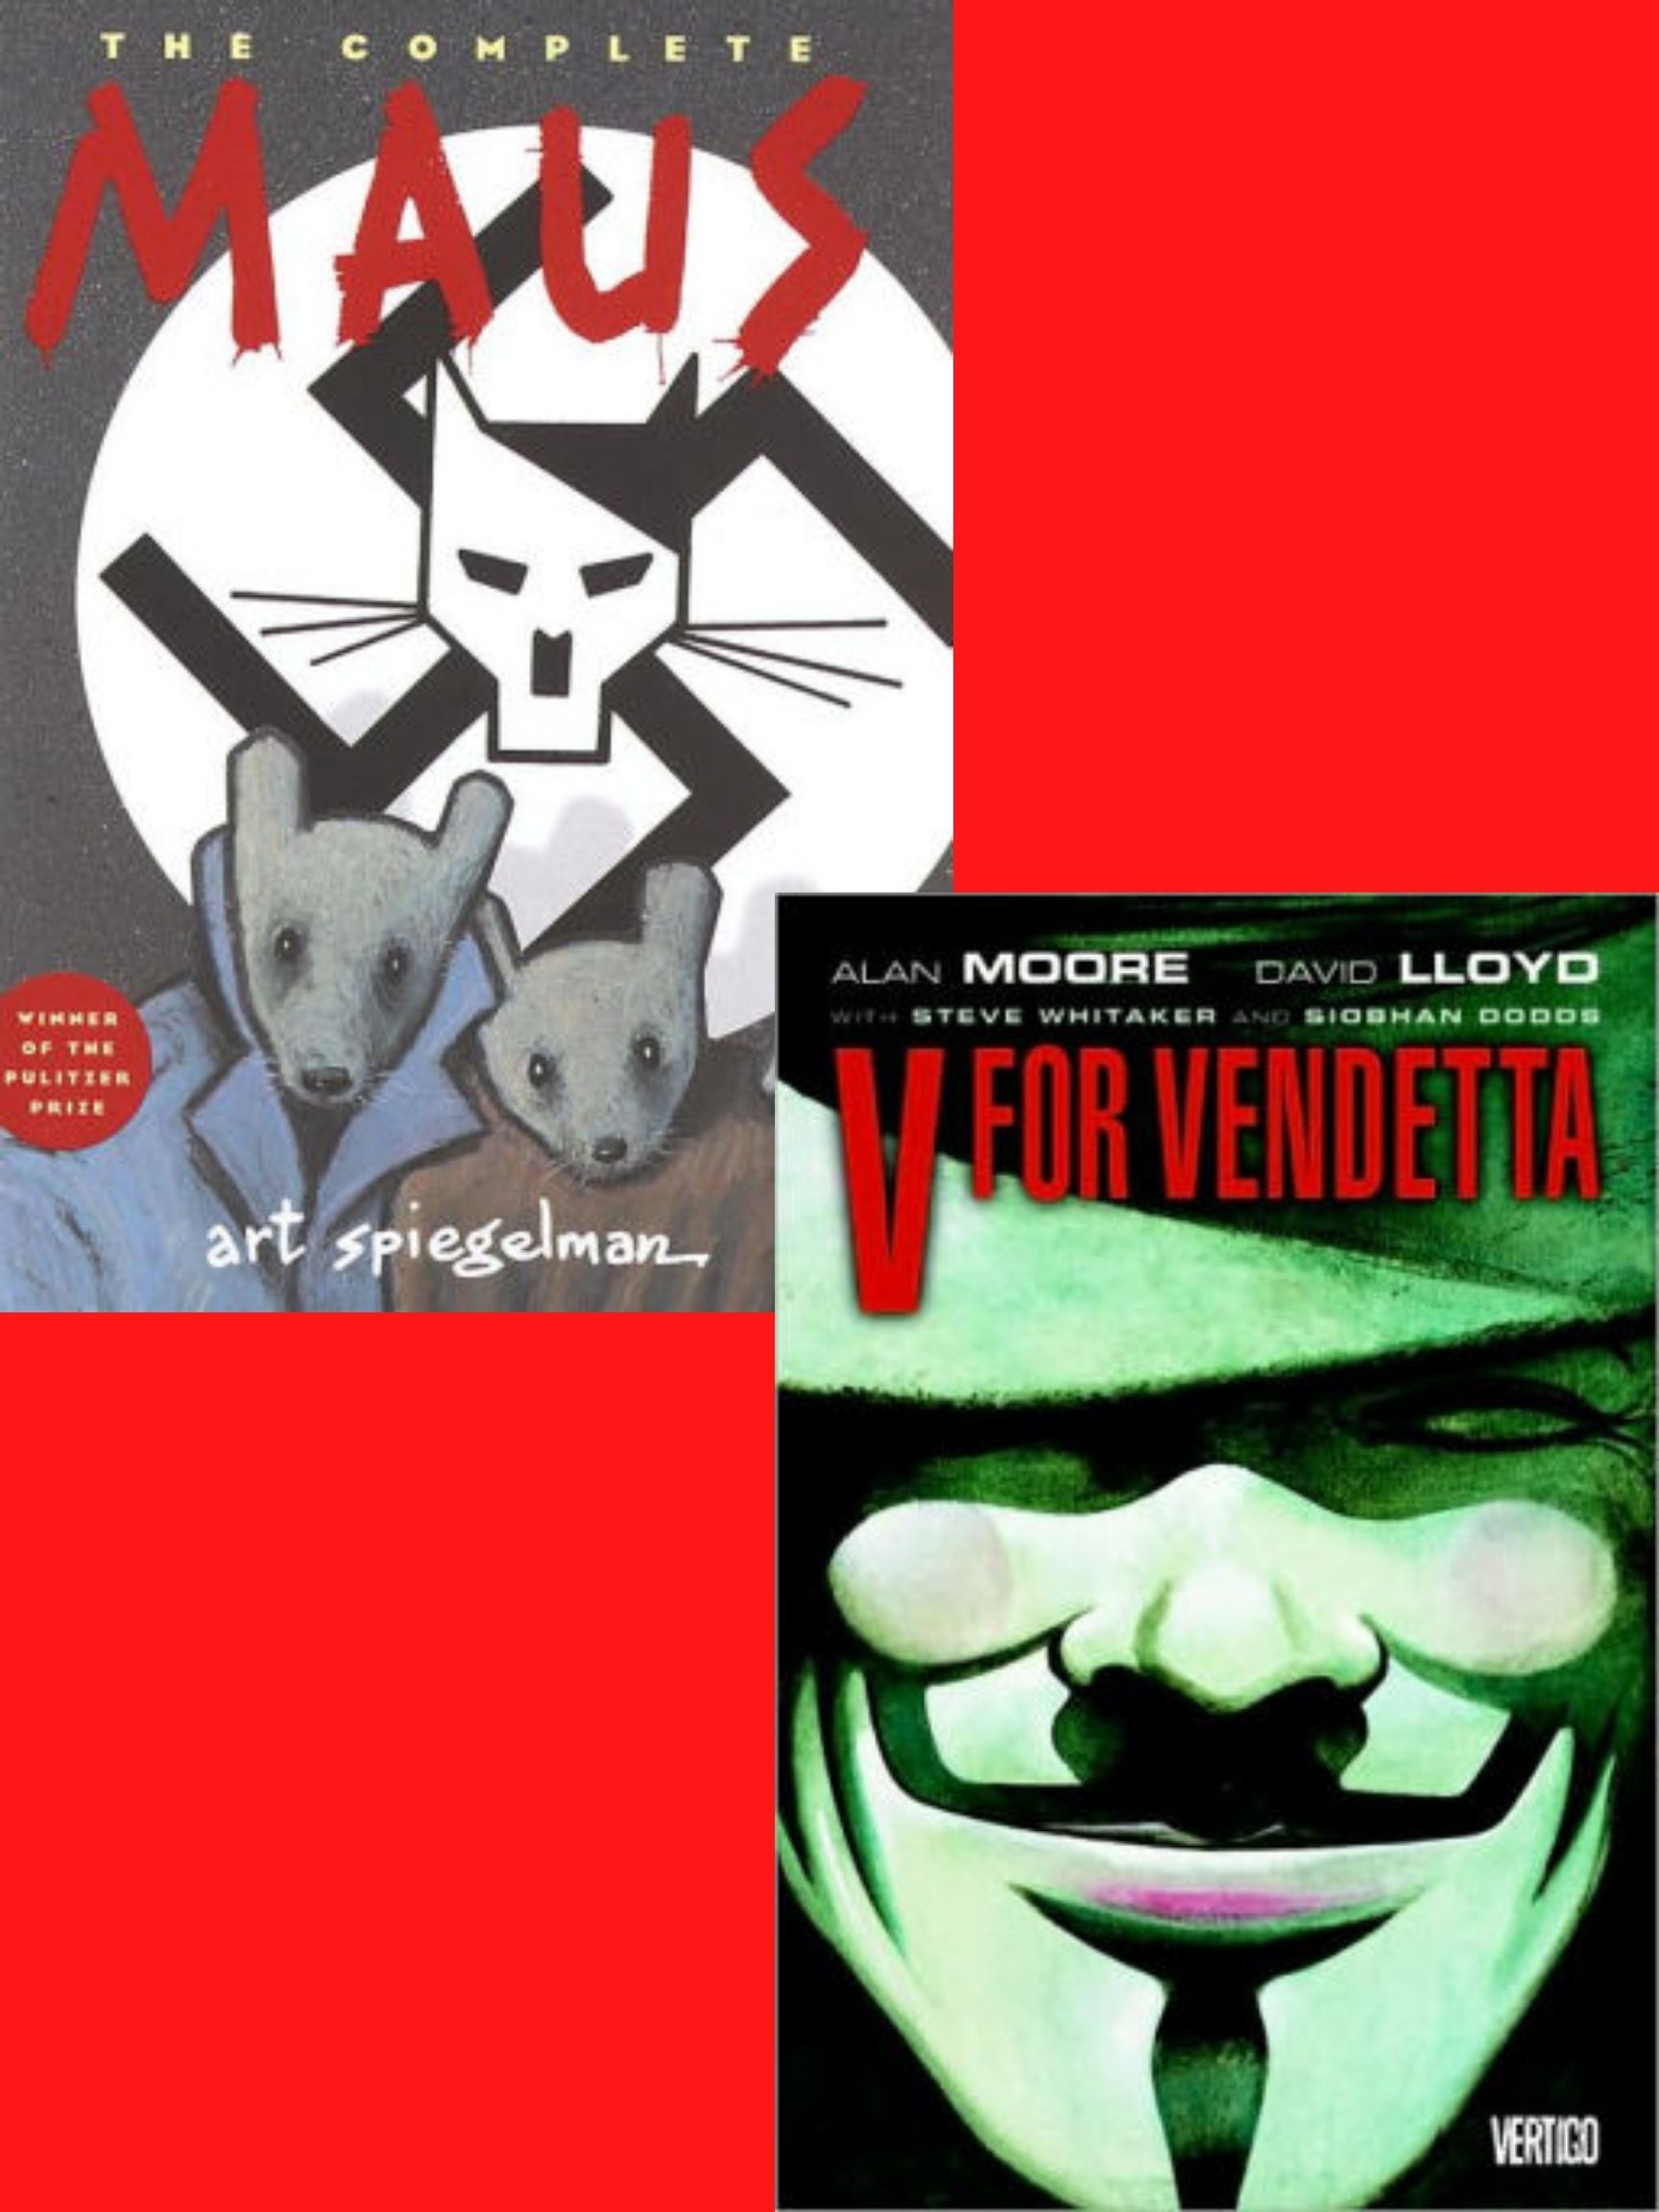 mice and person in guy fawkes mask